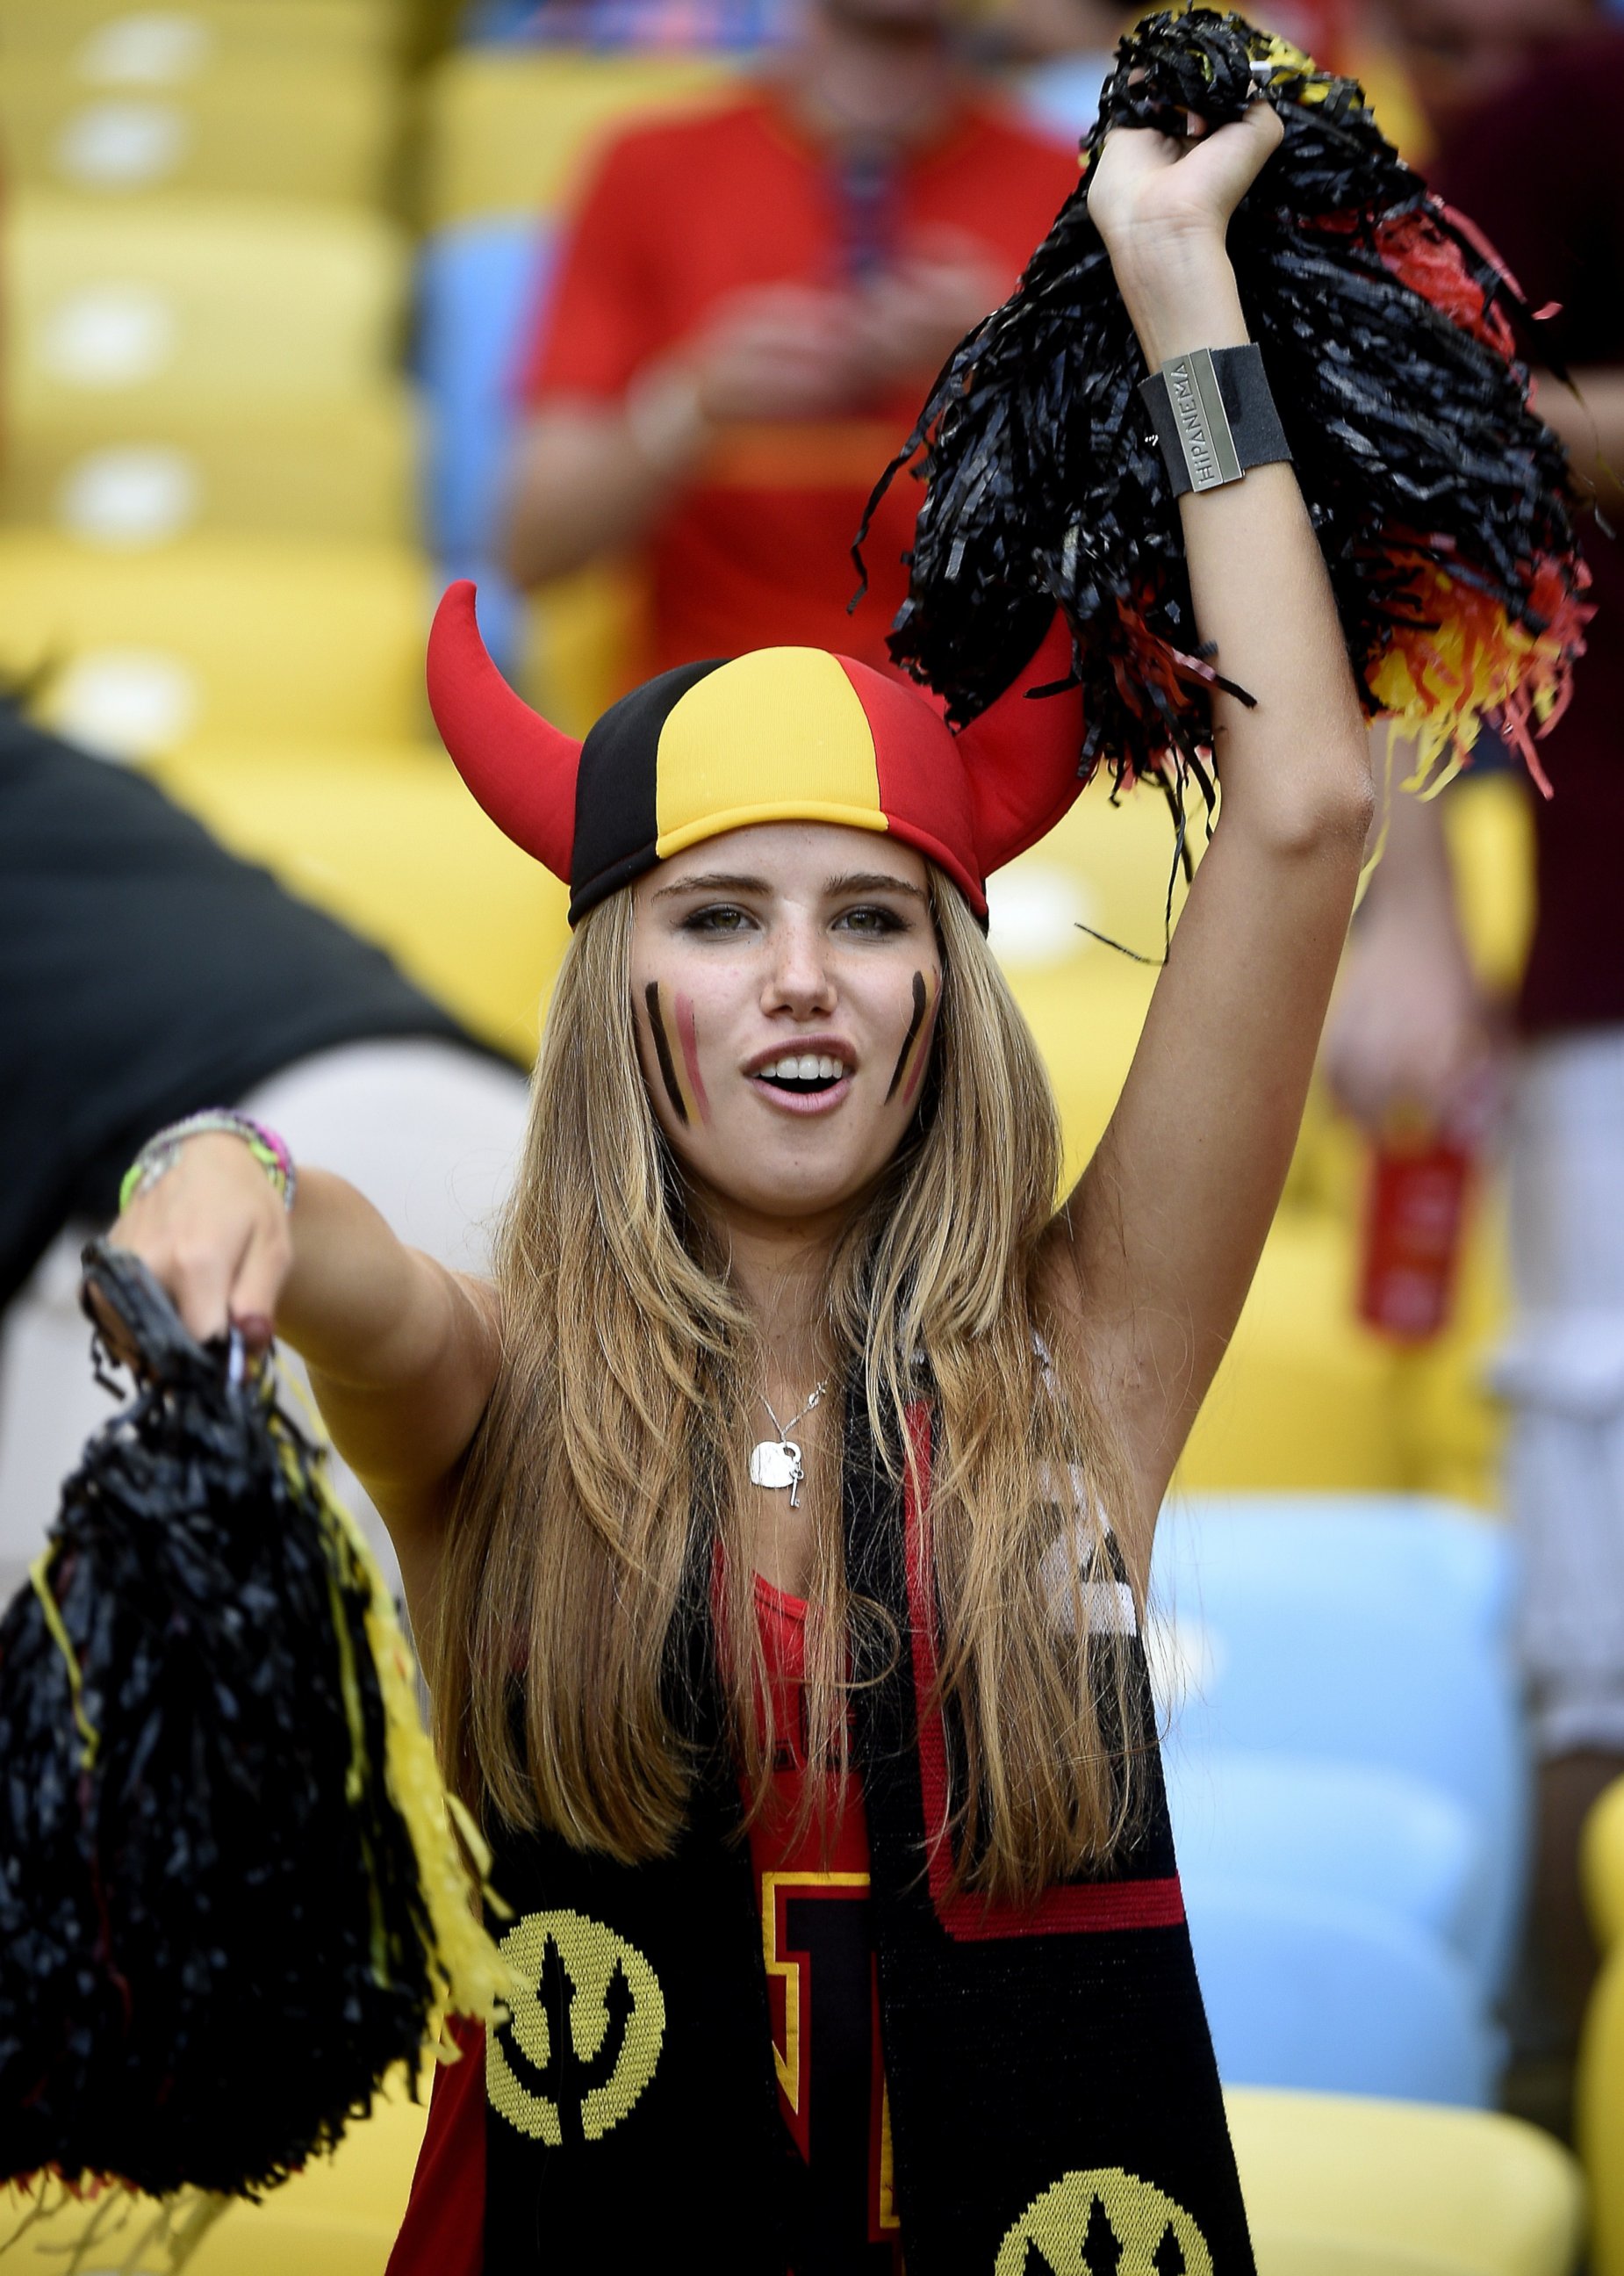 PHOTO: Axelle Despiegelaere, a Belgium fan poses as she waits for the start of the Group H football match between Belgium and Russia at the Maracana Stadium in Rio de Janeiro during the 2014 FIFA World Cup on June 22, 2014.